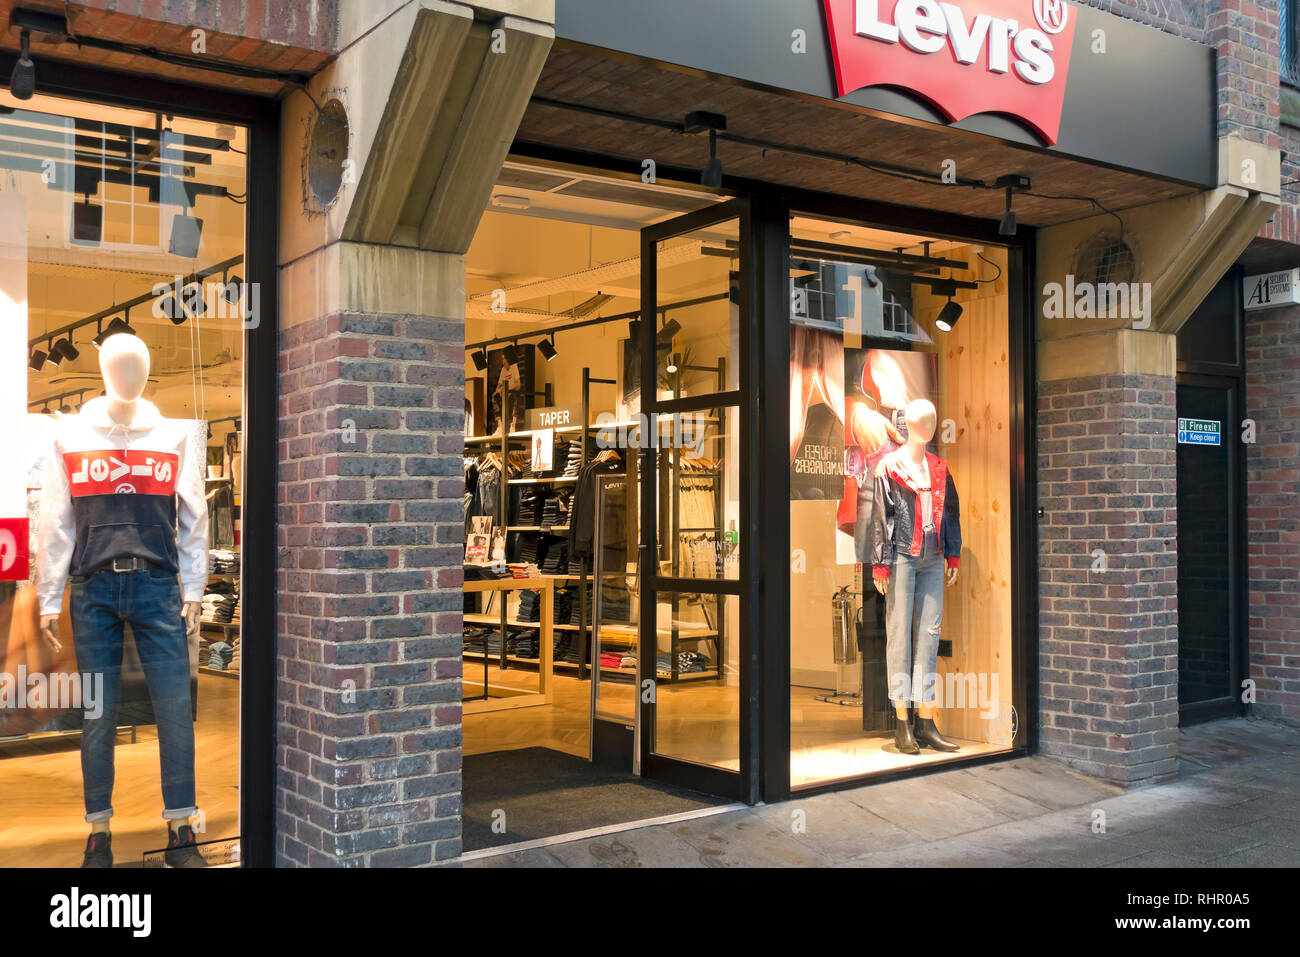 Levis Casual High Resolution Stock 